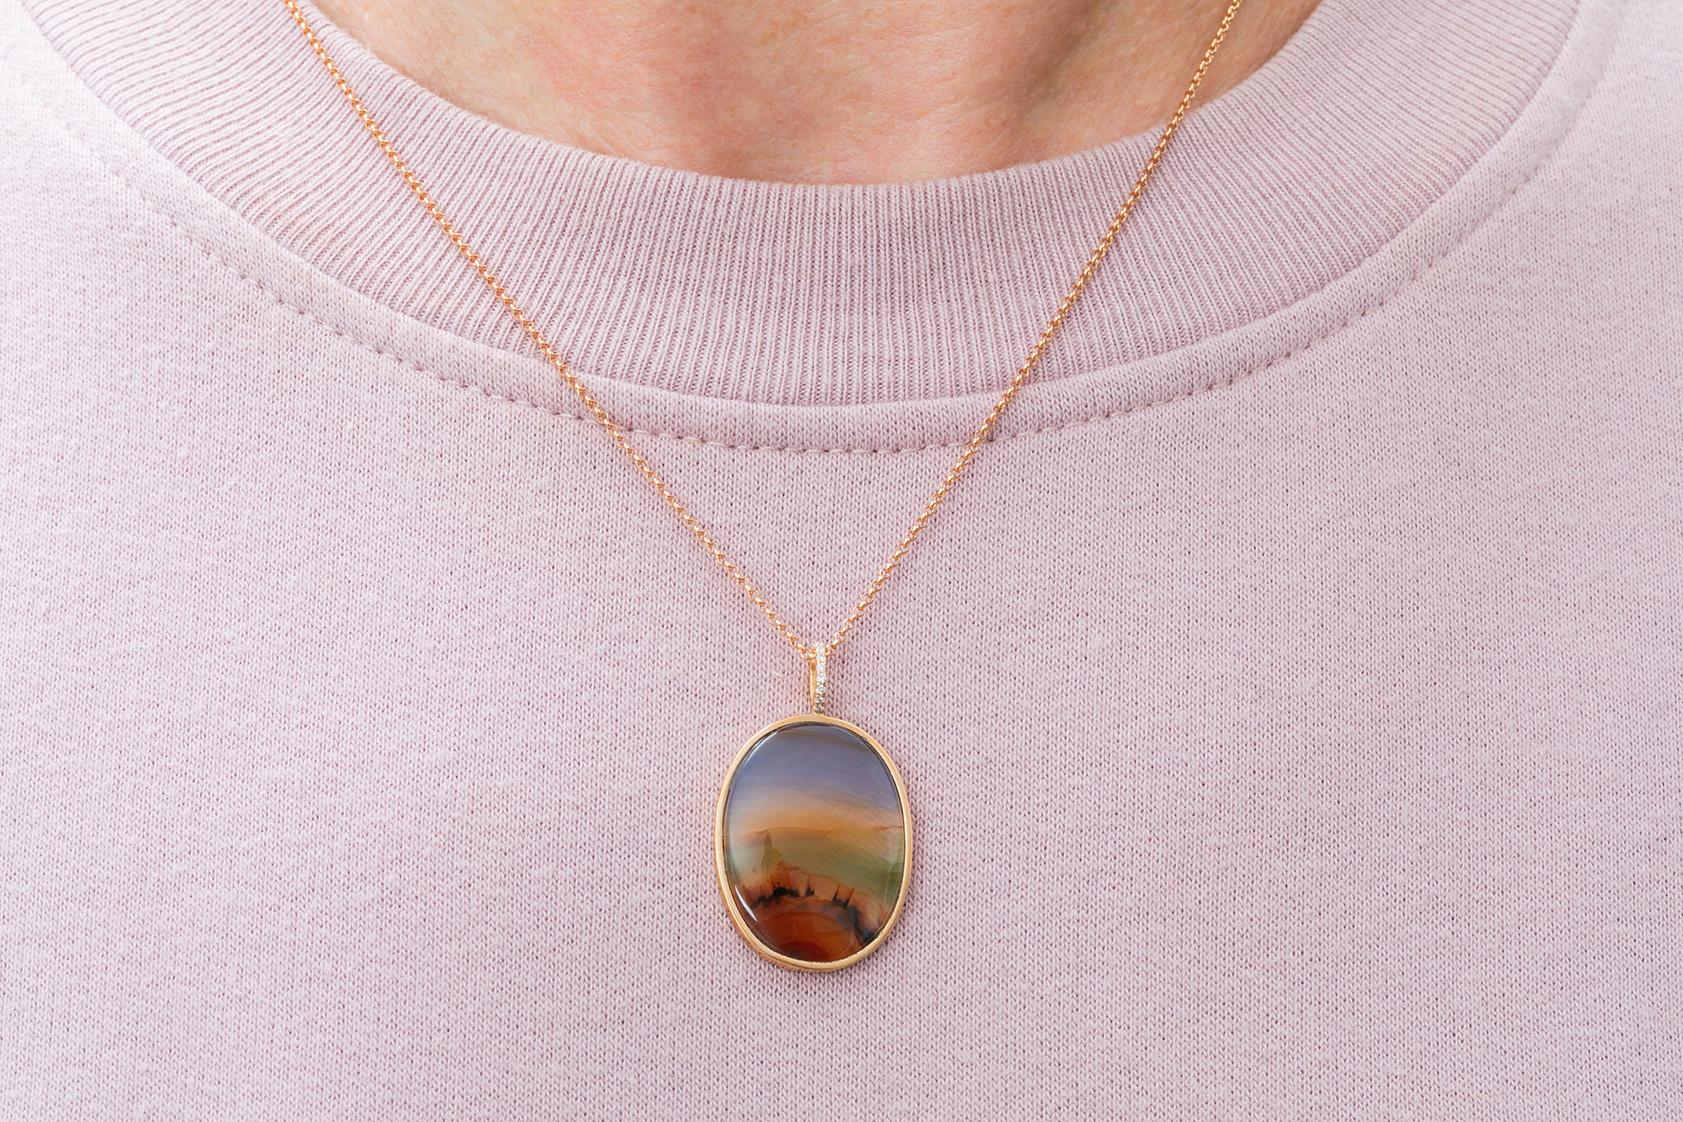 This landscape is natural! Made of agate and set in 18k pink gold with diamonds on the hook.
The pendant comes with a 18k pink gold adjustable chain of 50 cm.
Wear it alone or layer with other chains for a summer look!